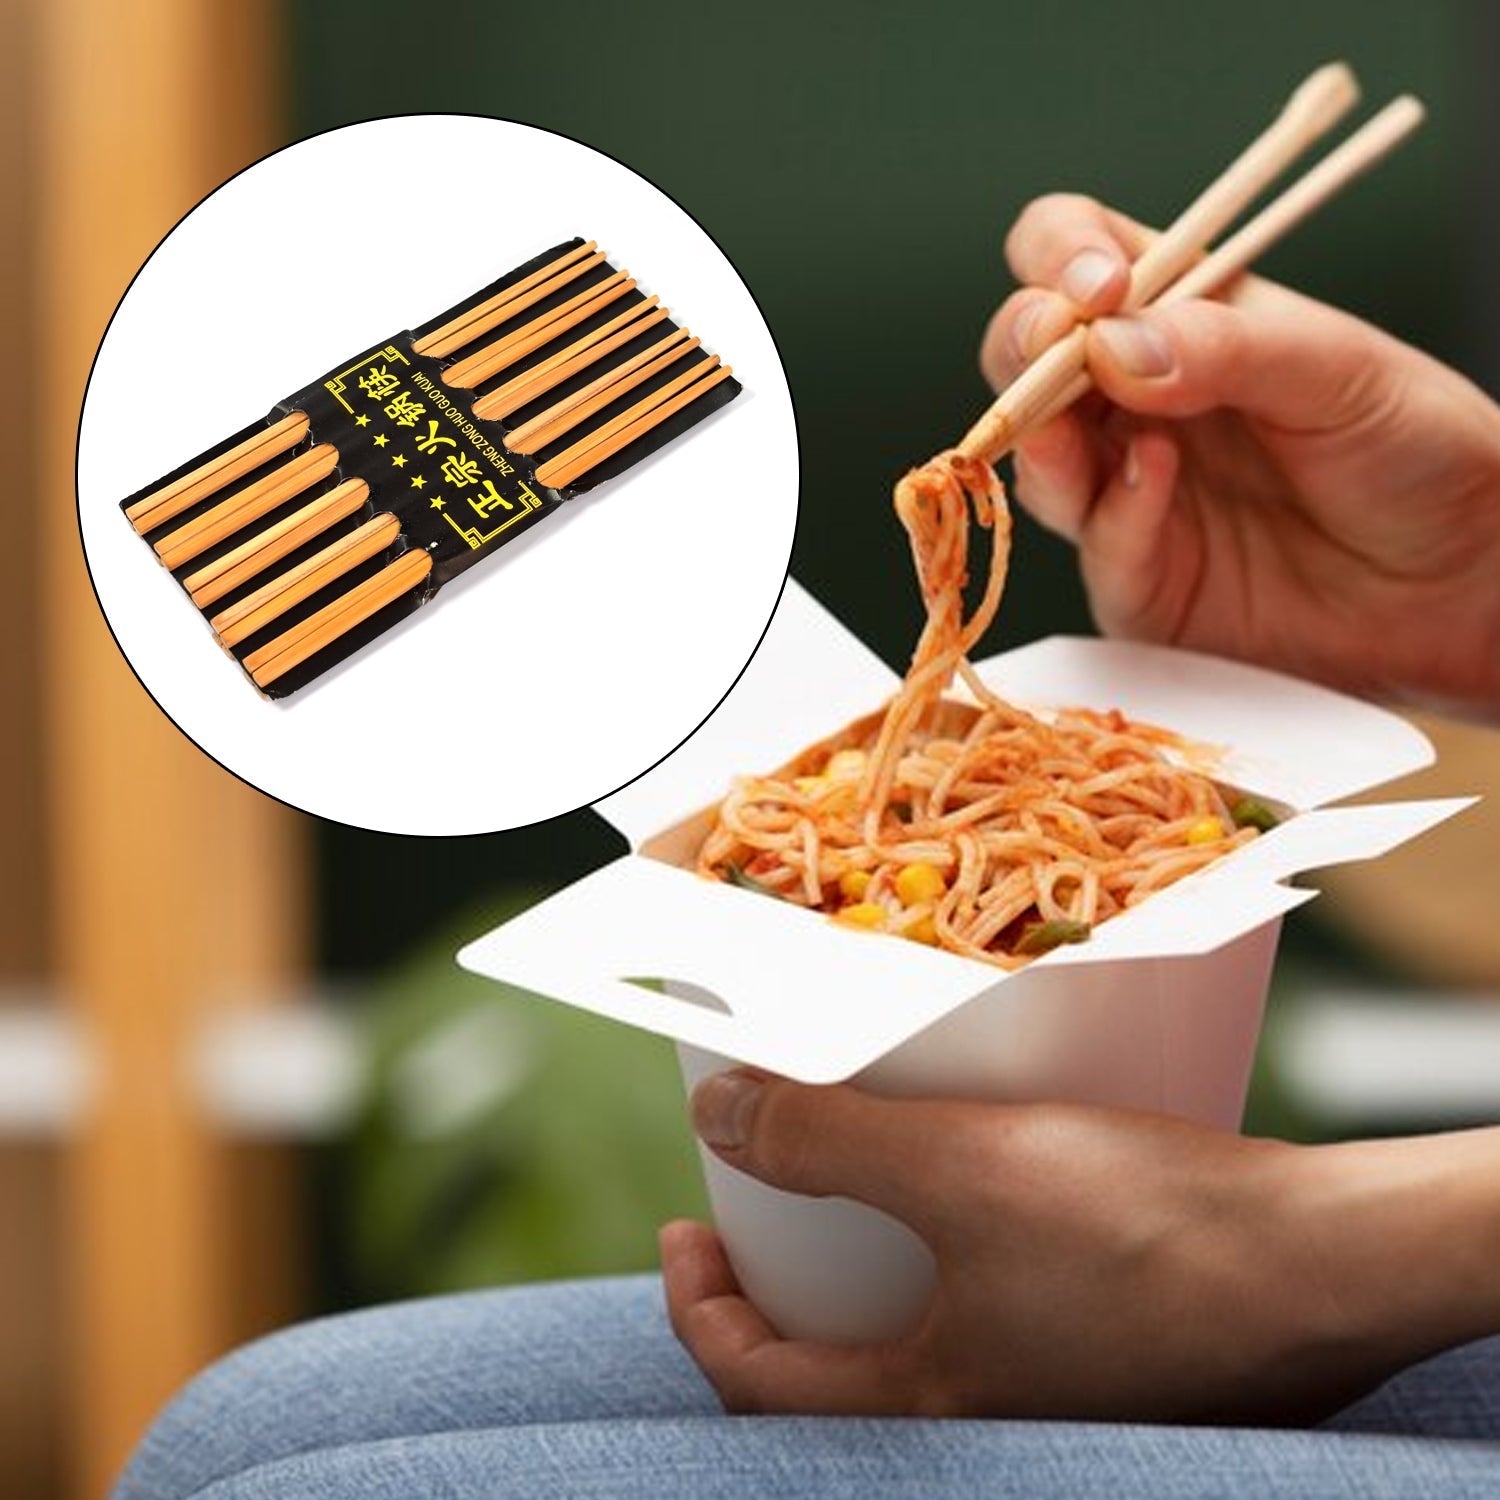 2908 10pair Chopsticks Set Lightweight Easy to Use Chop Sticks with Case for Sushi, Noodles and Other Asian Food 